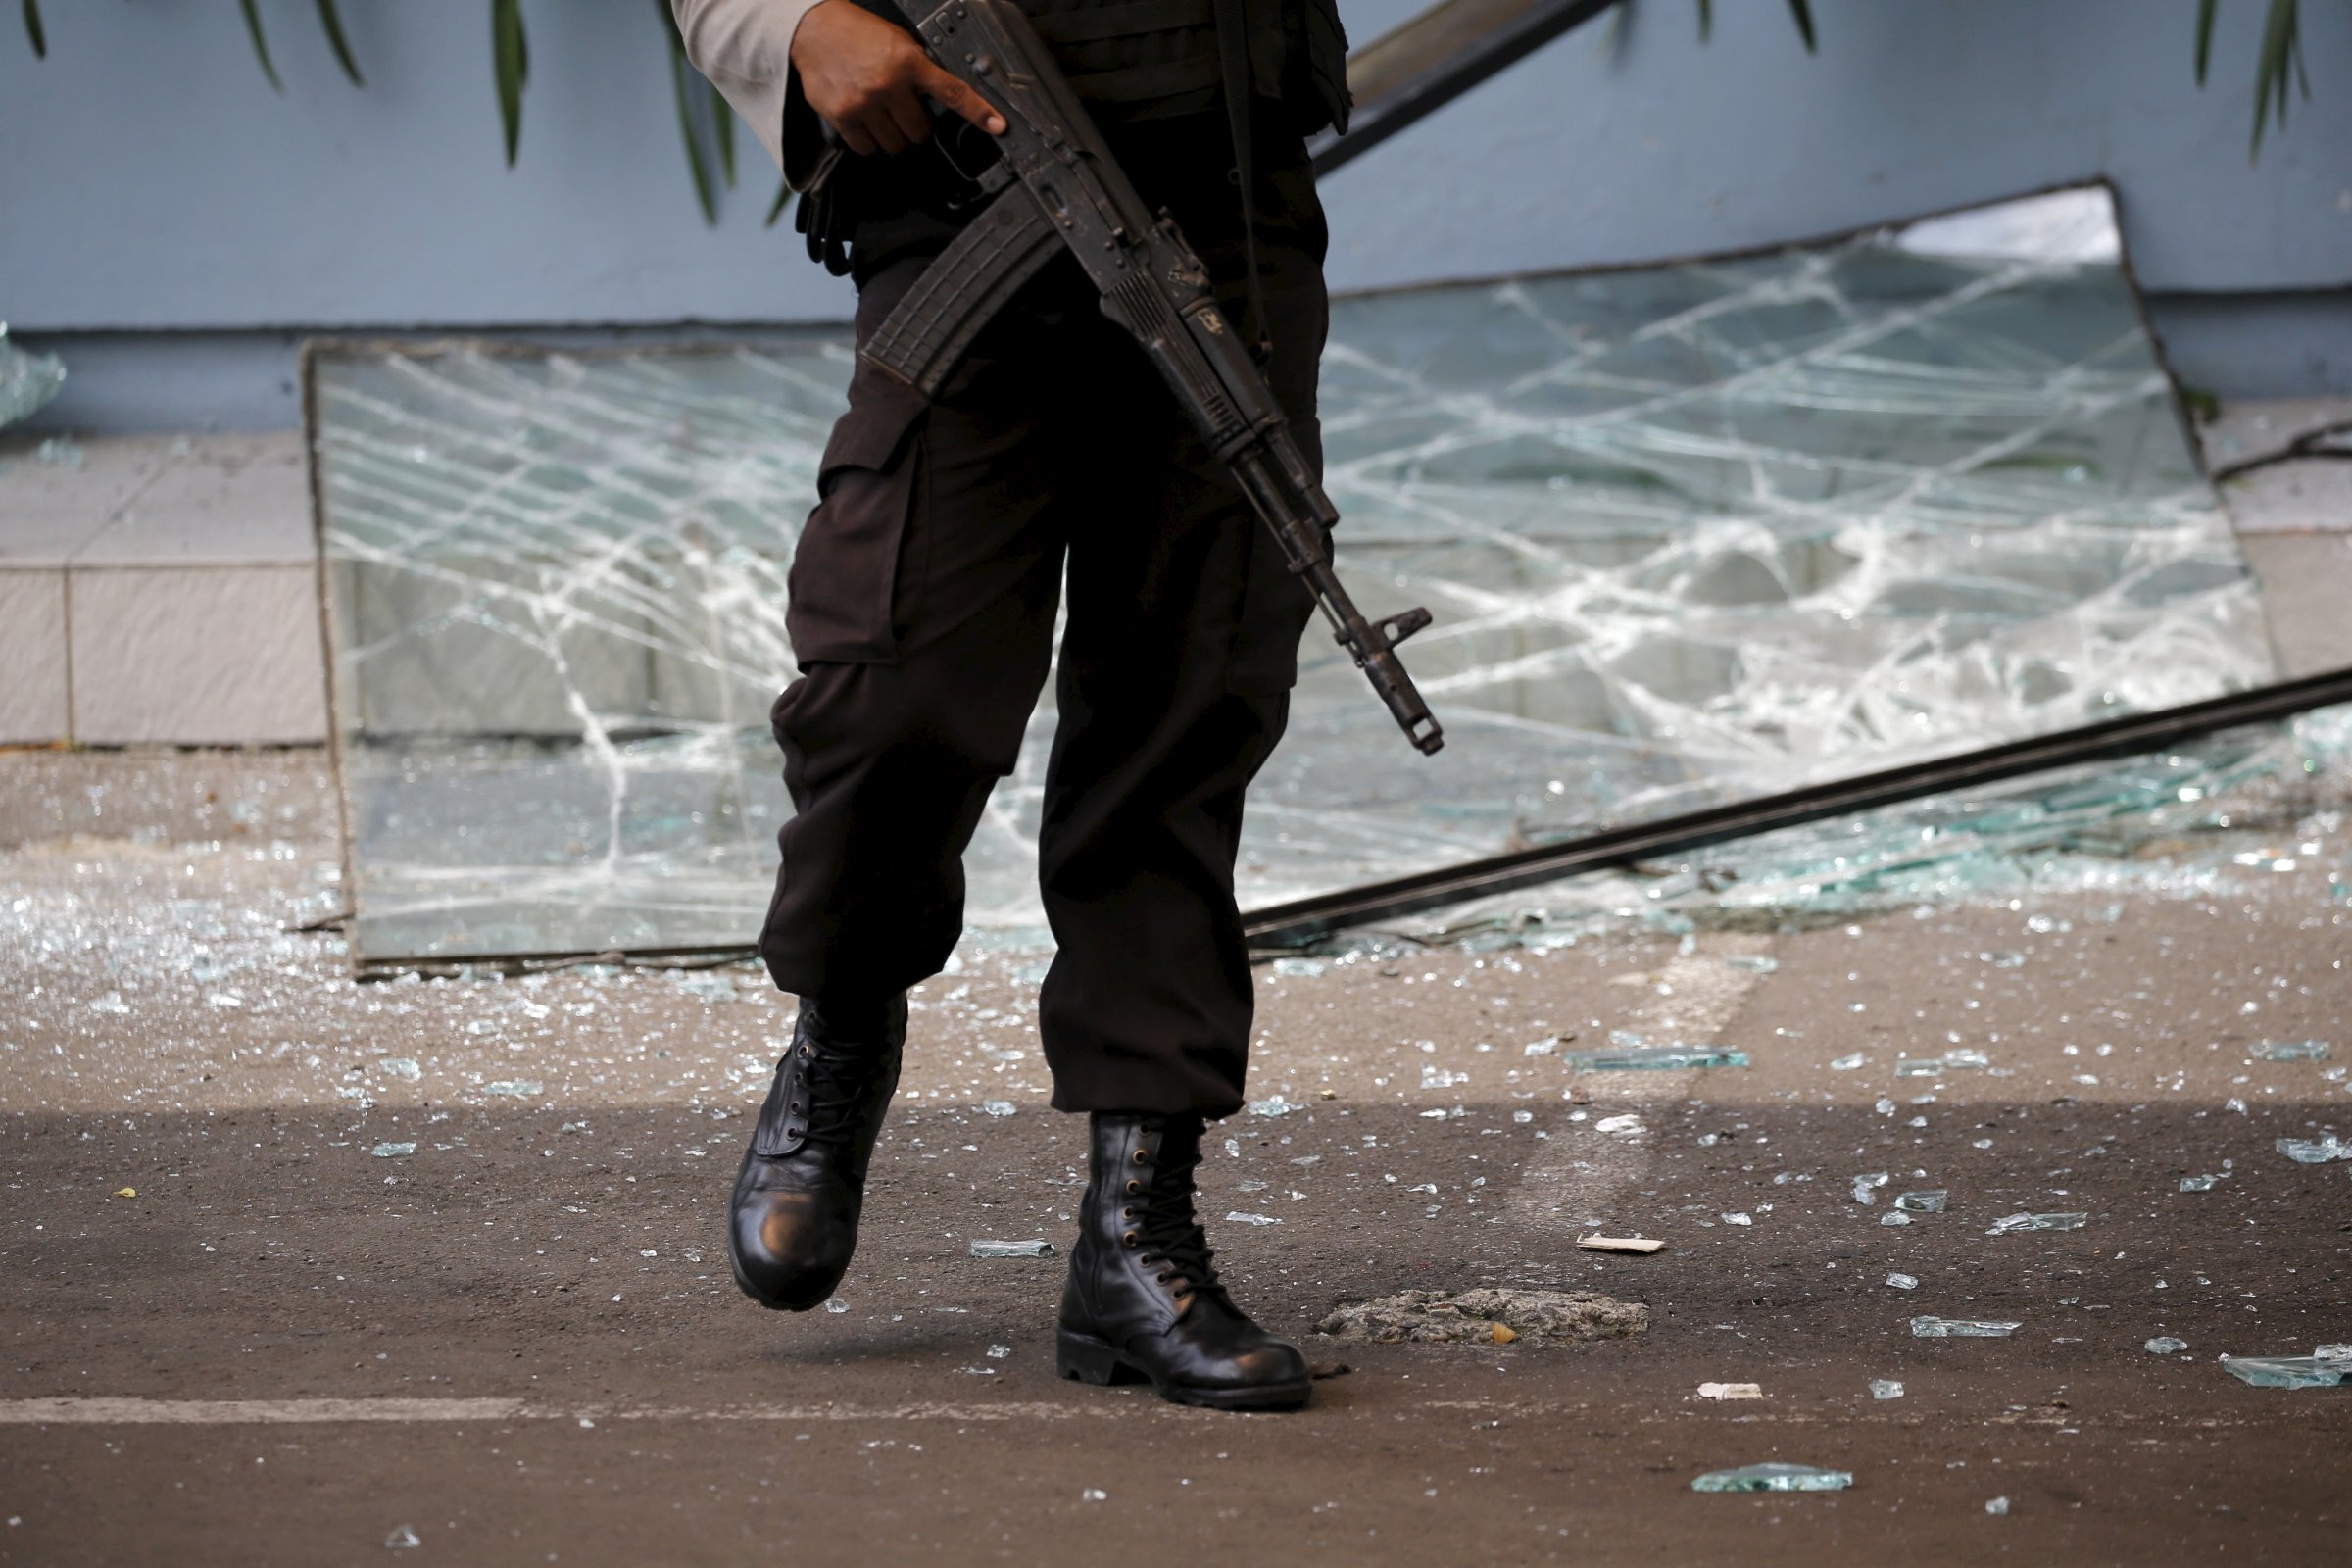 An Indonesian policeman holds a weapon while walking near a broken glass window from a Starbucks outlet in Jakarta